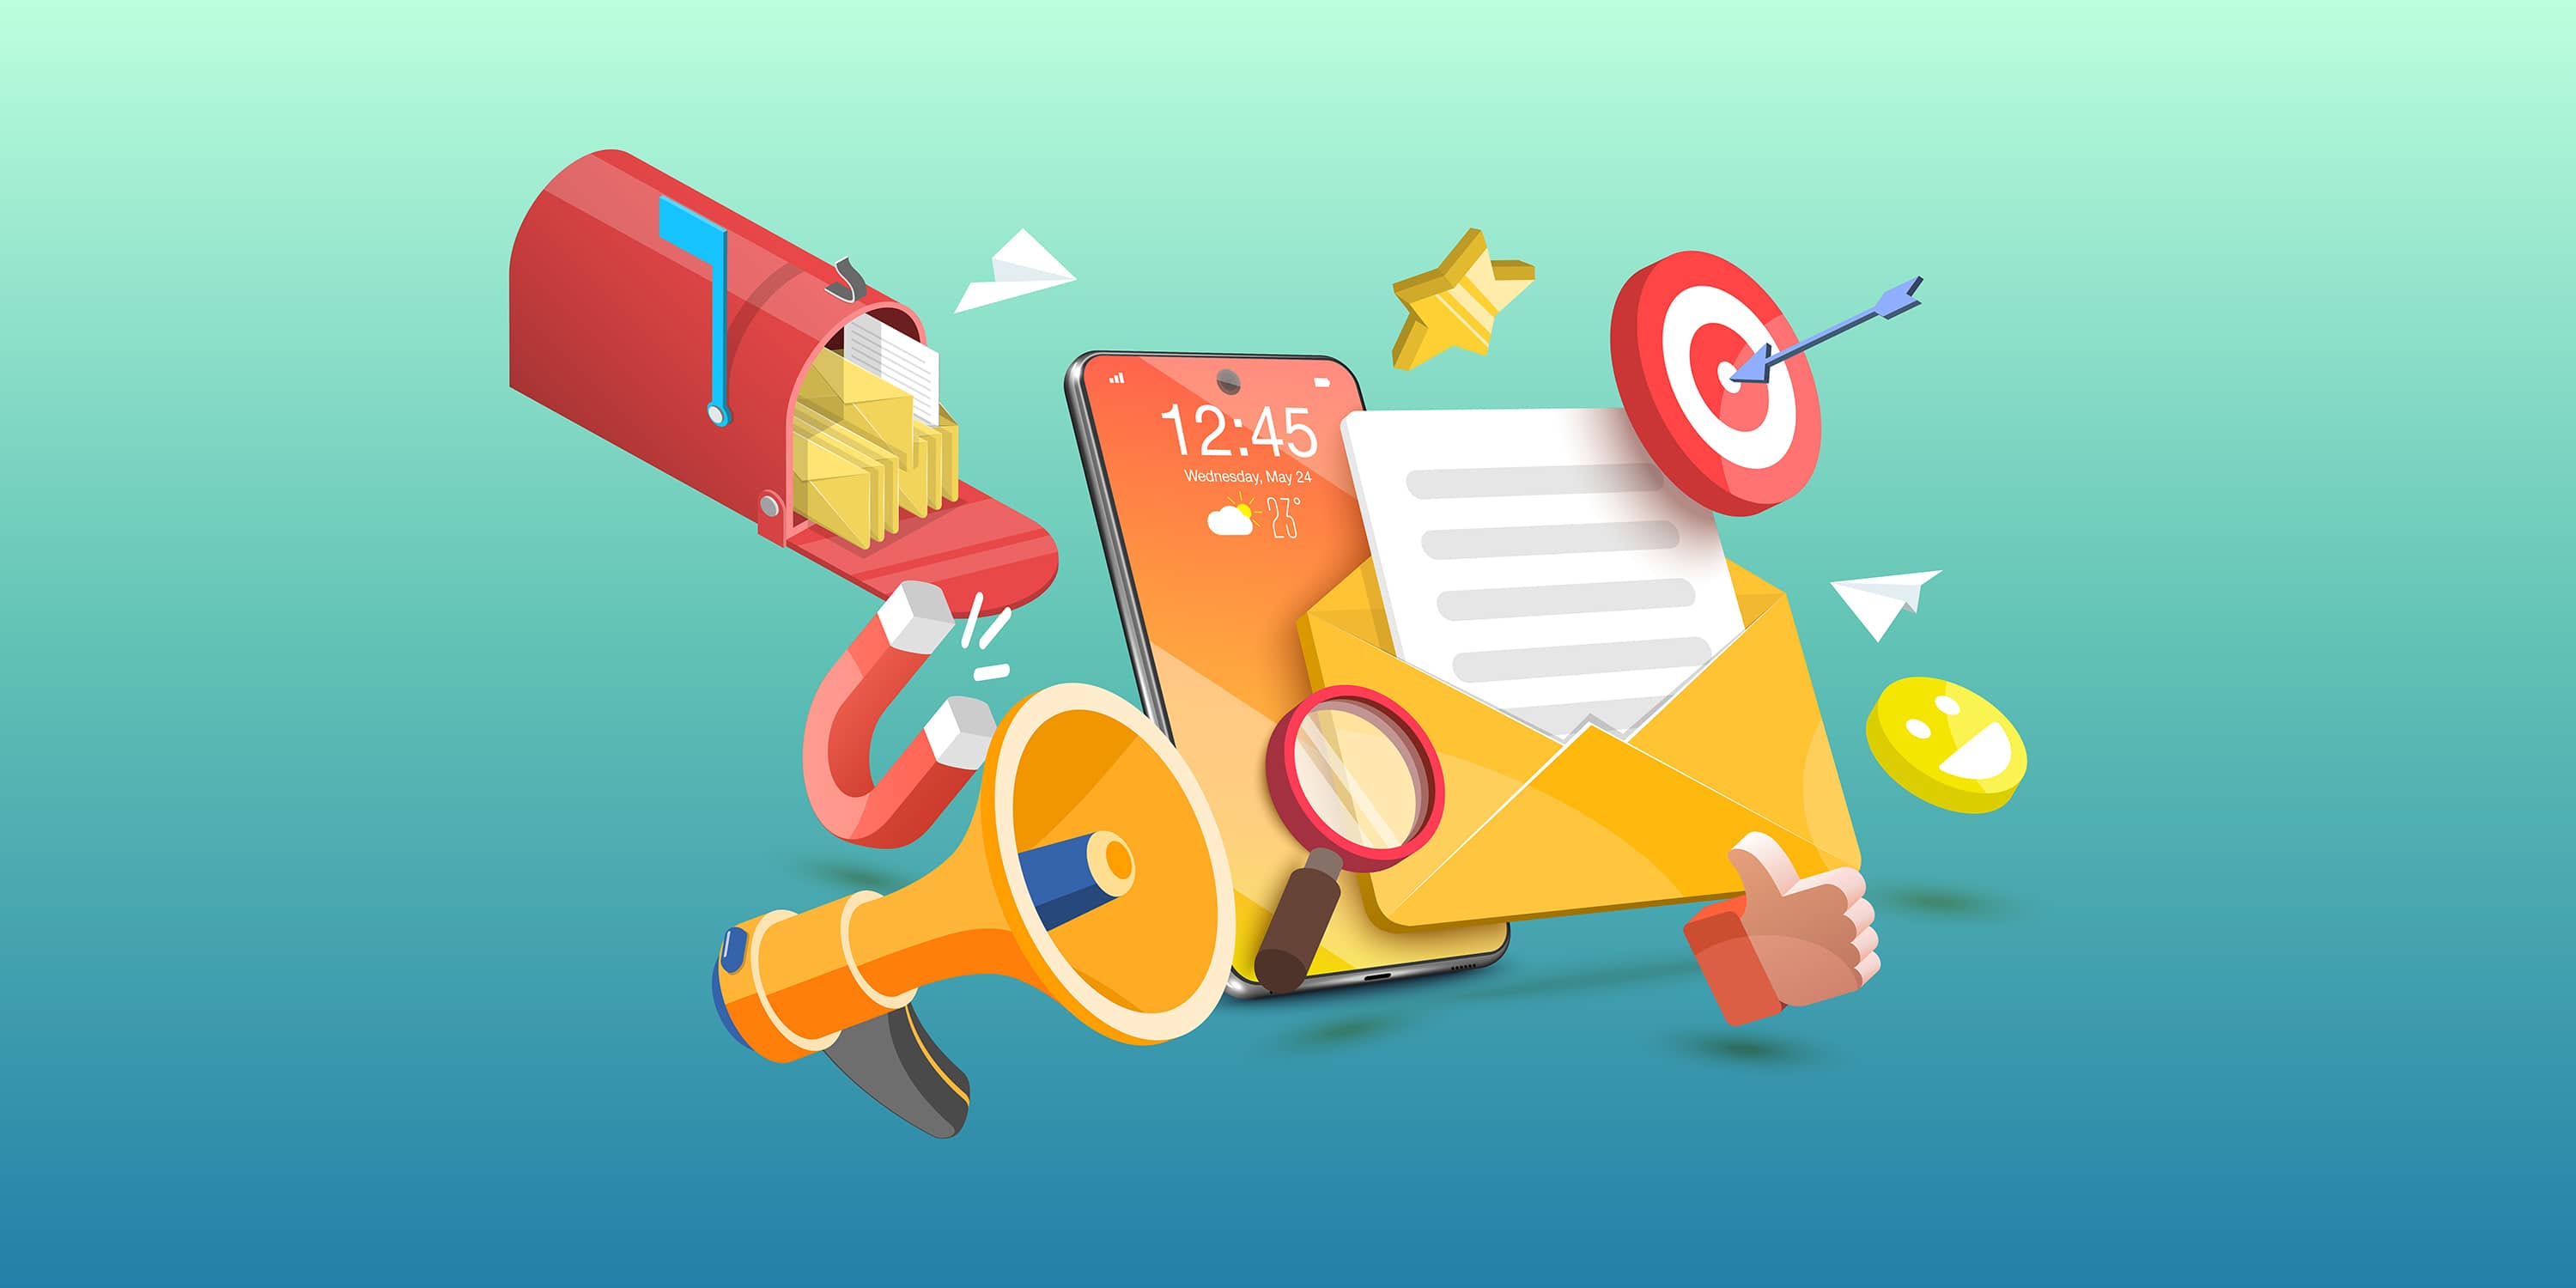 Email marketing illustration; an email icon is surrounded by a thumbs up, magnet, paper airplane, mailbox and stars.